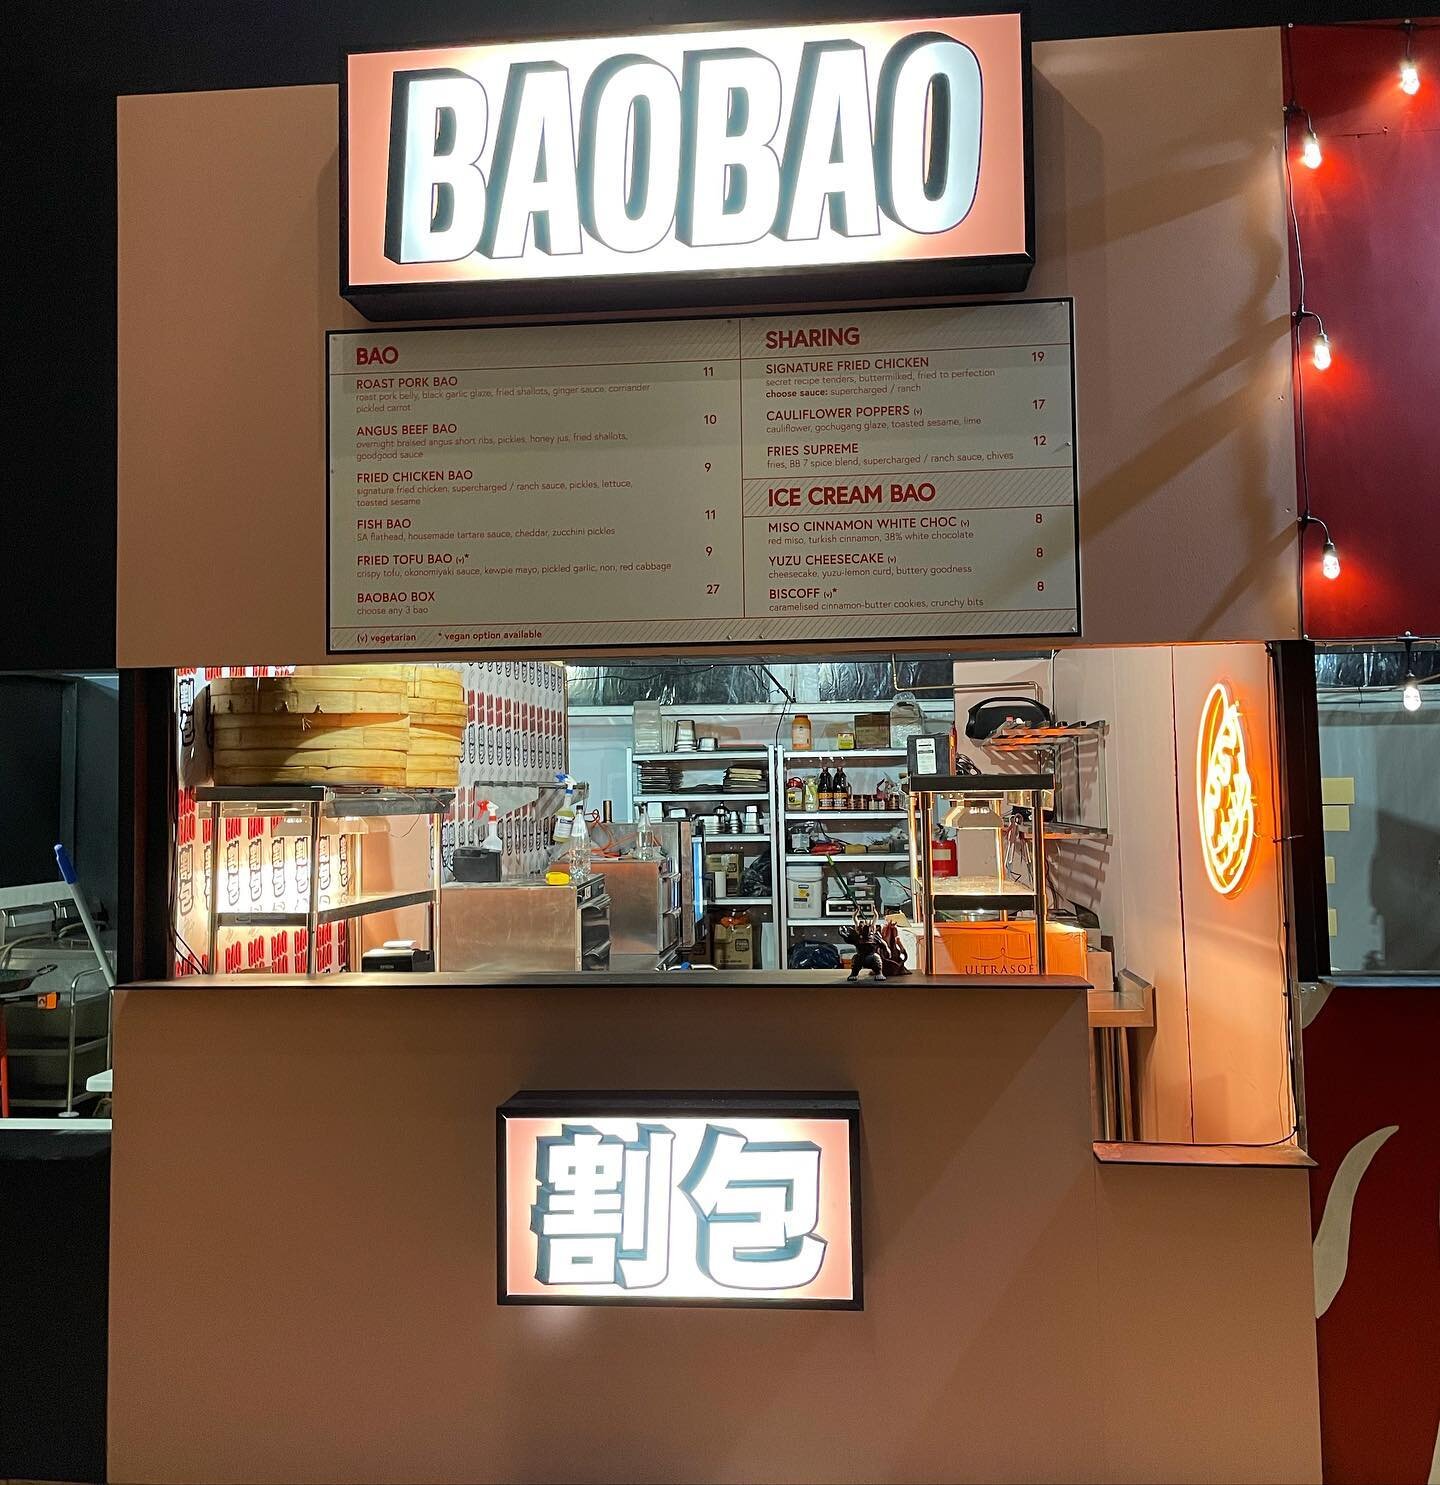 Come and checkout our sister shop @baobao_adelaide at @illuminateadelaide BASECAMP. Open every night (except mondays) from 5pm 😘😘😘